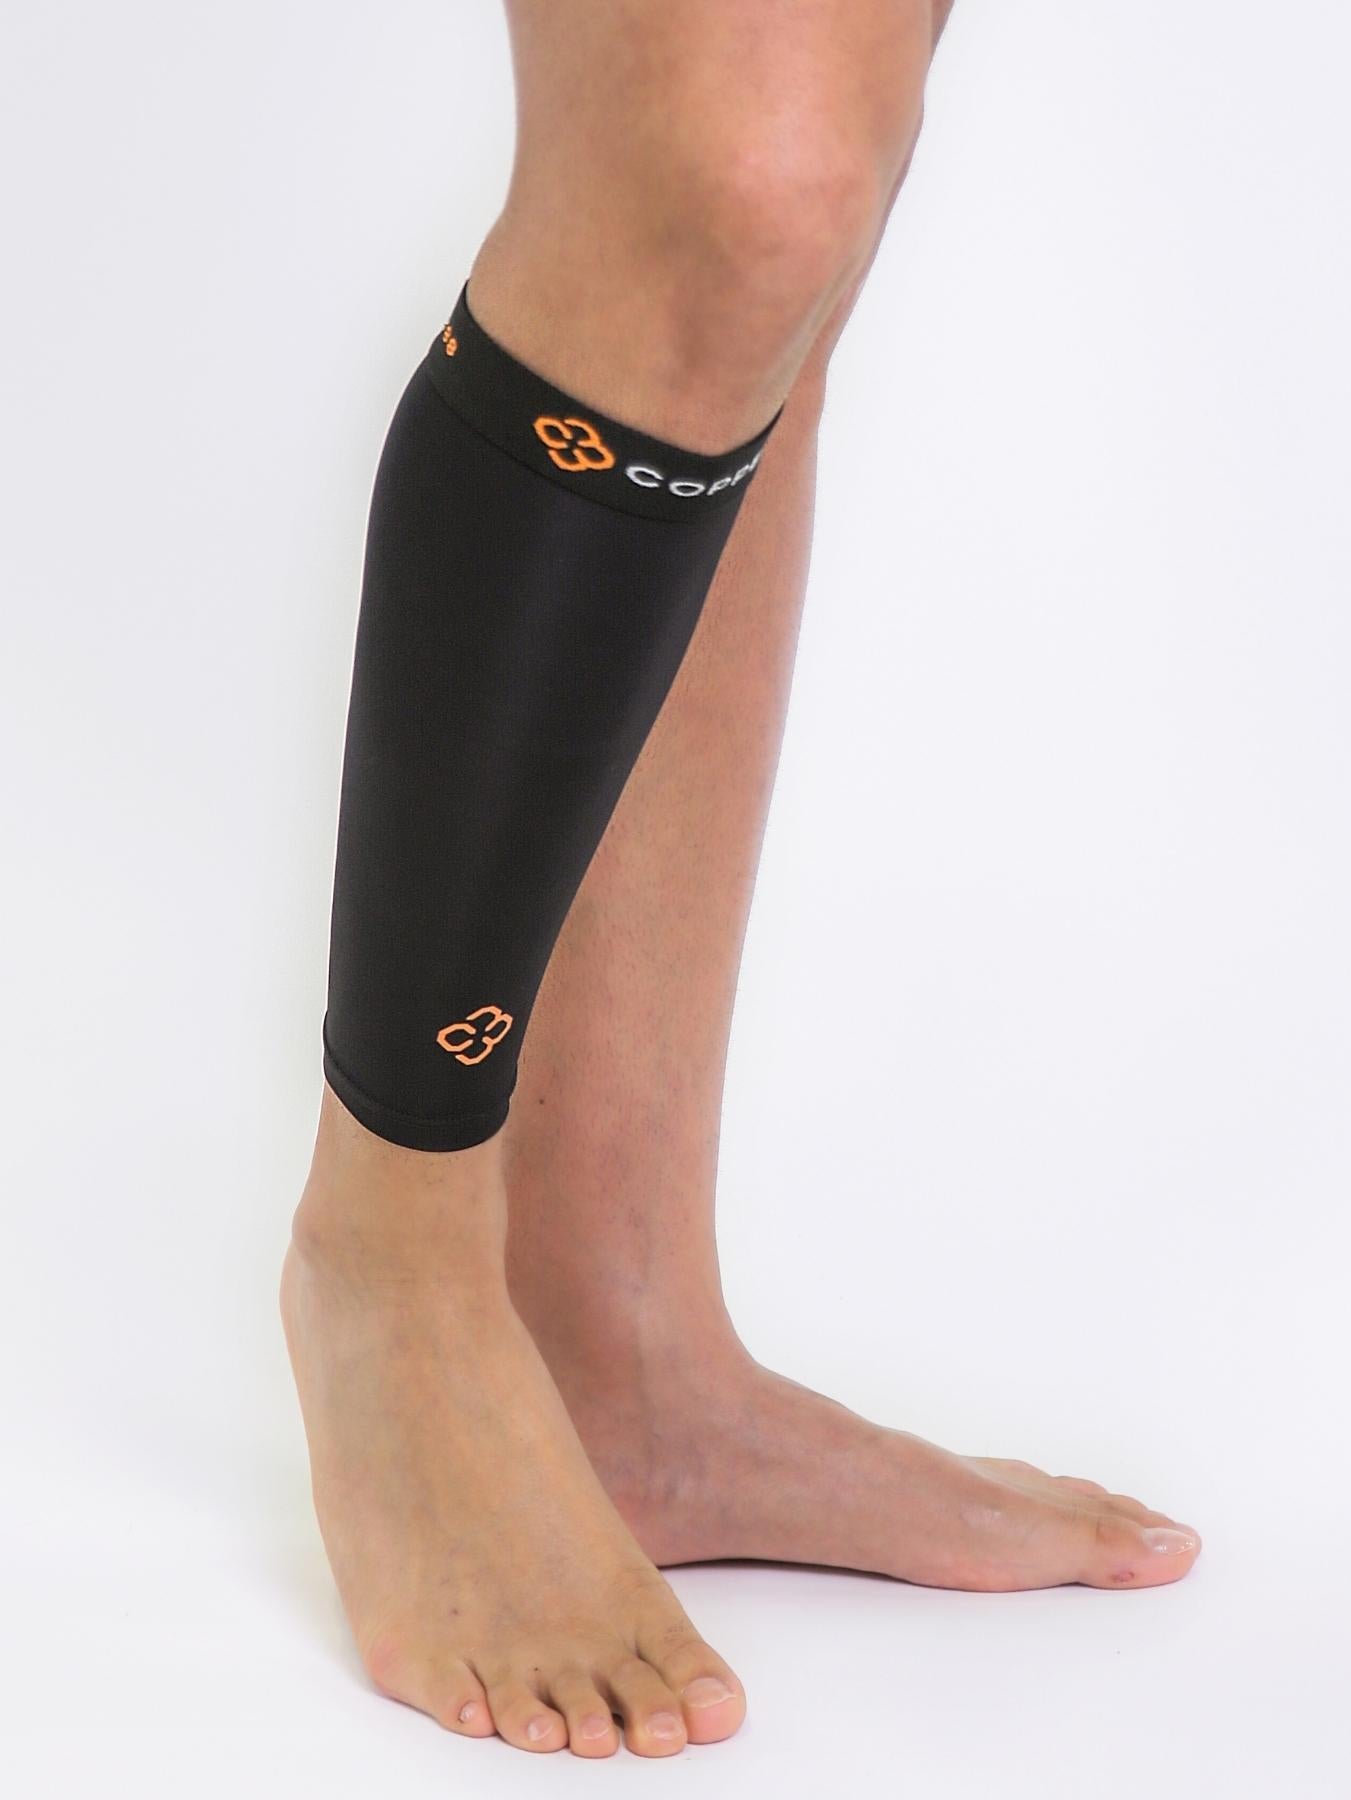 CALF Copper Compression SLEEVES by COPPER HEAL (1 Pair) - Best for doing  Exercise as well as Sport Recovery - Calf Muscle Strains Shin Splints Leg